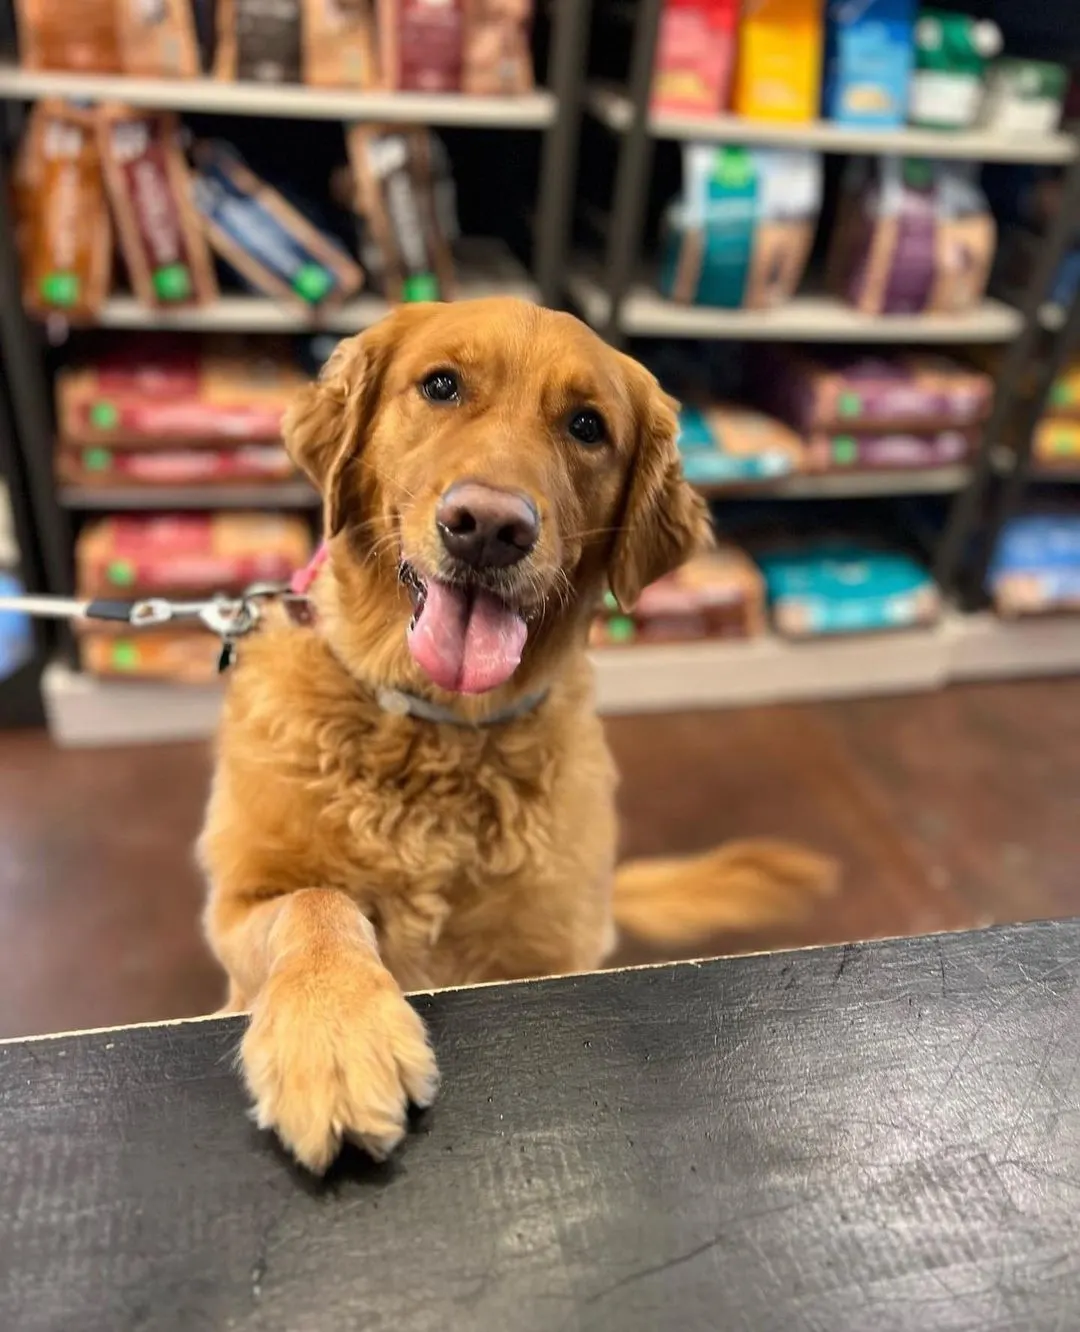 Golden retriever with paw on desk at pet store